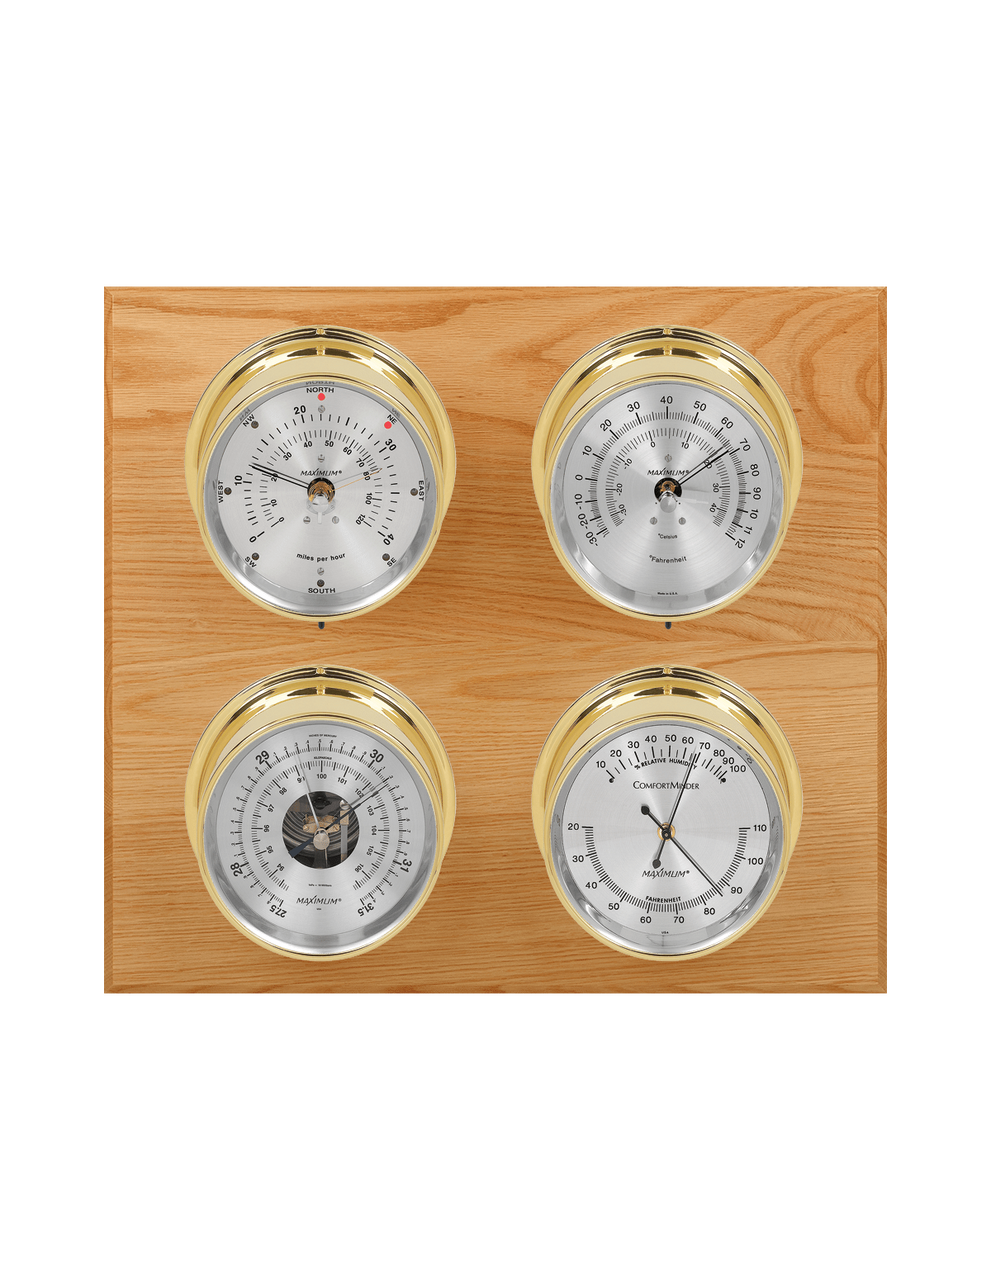 Observer Wind, Thermometer, Barometer, and Humidity Weather Station - 4 Instruments - PVD Brass Cases - Oak - Silver Face - 2 Scales -Reads 0-120 mph